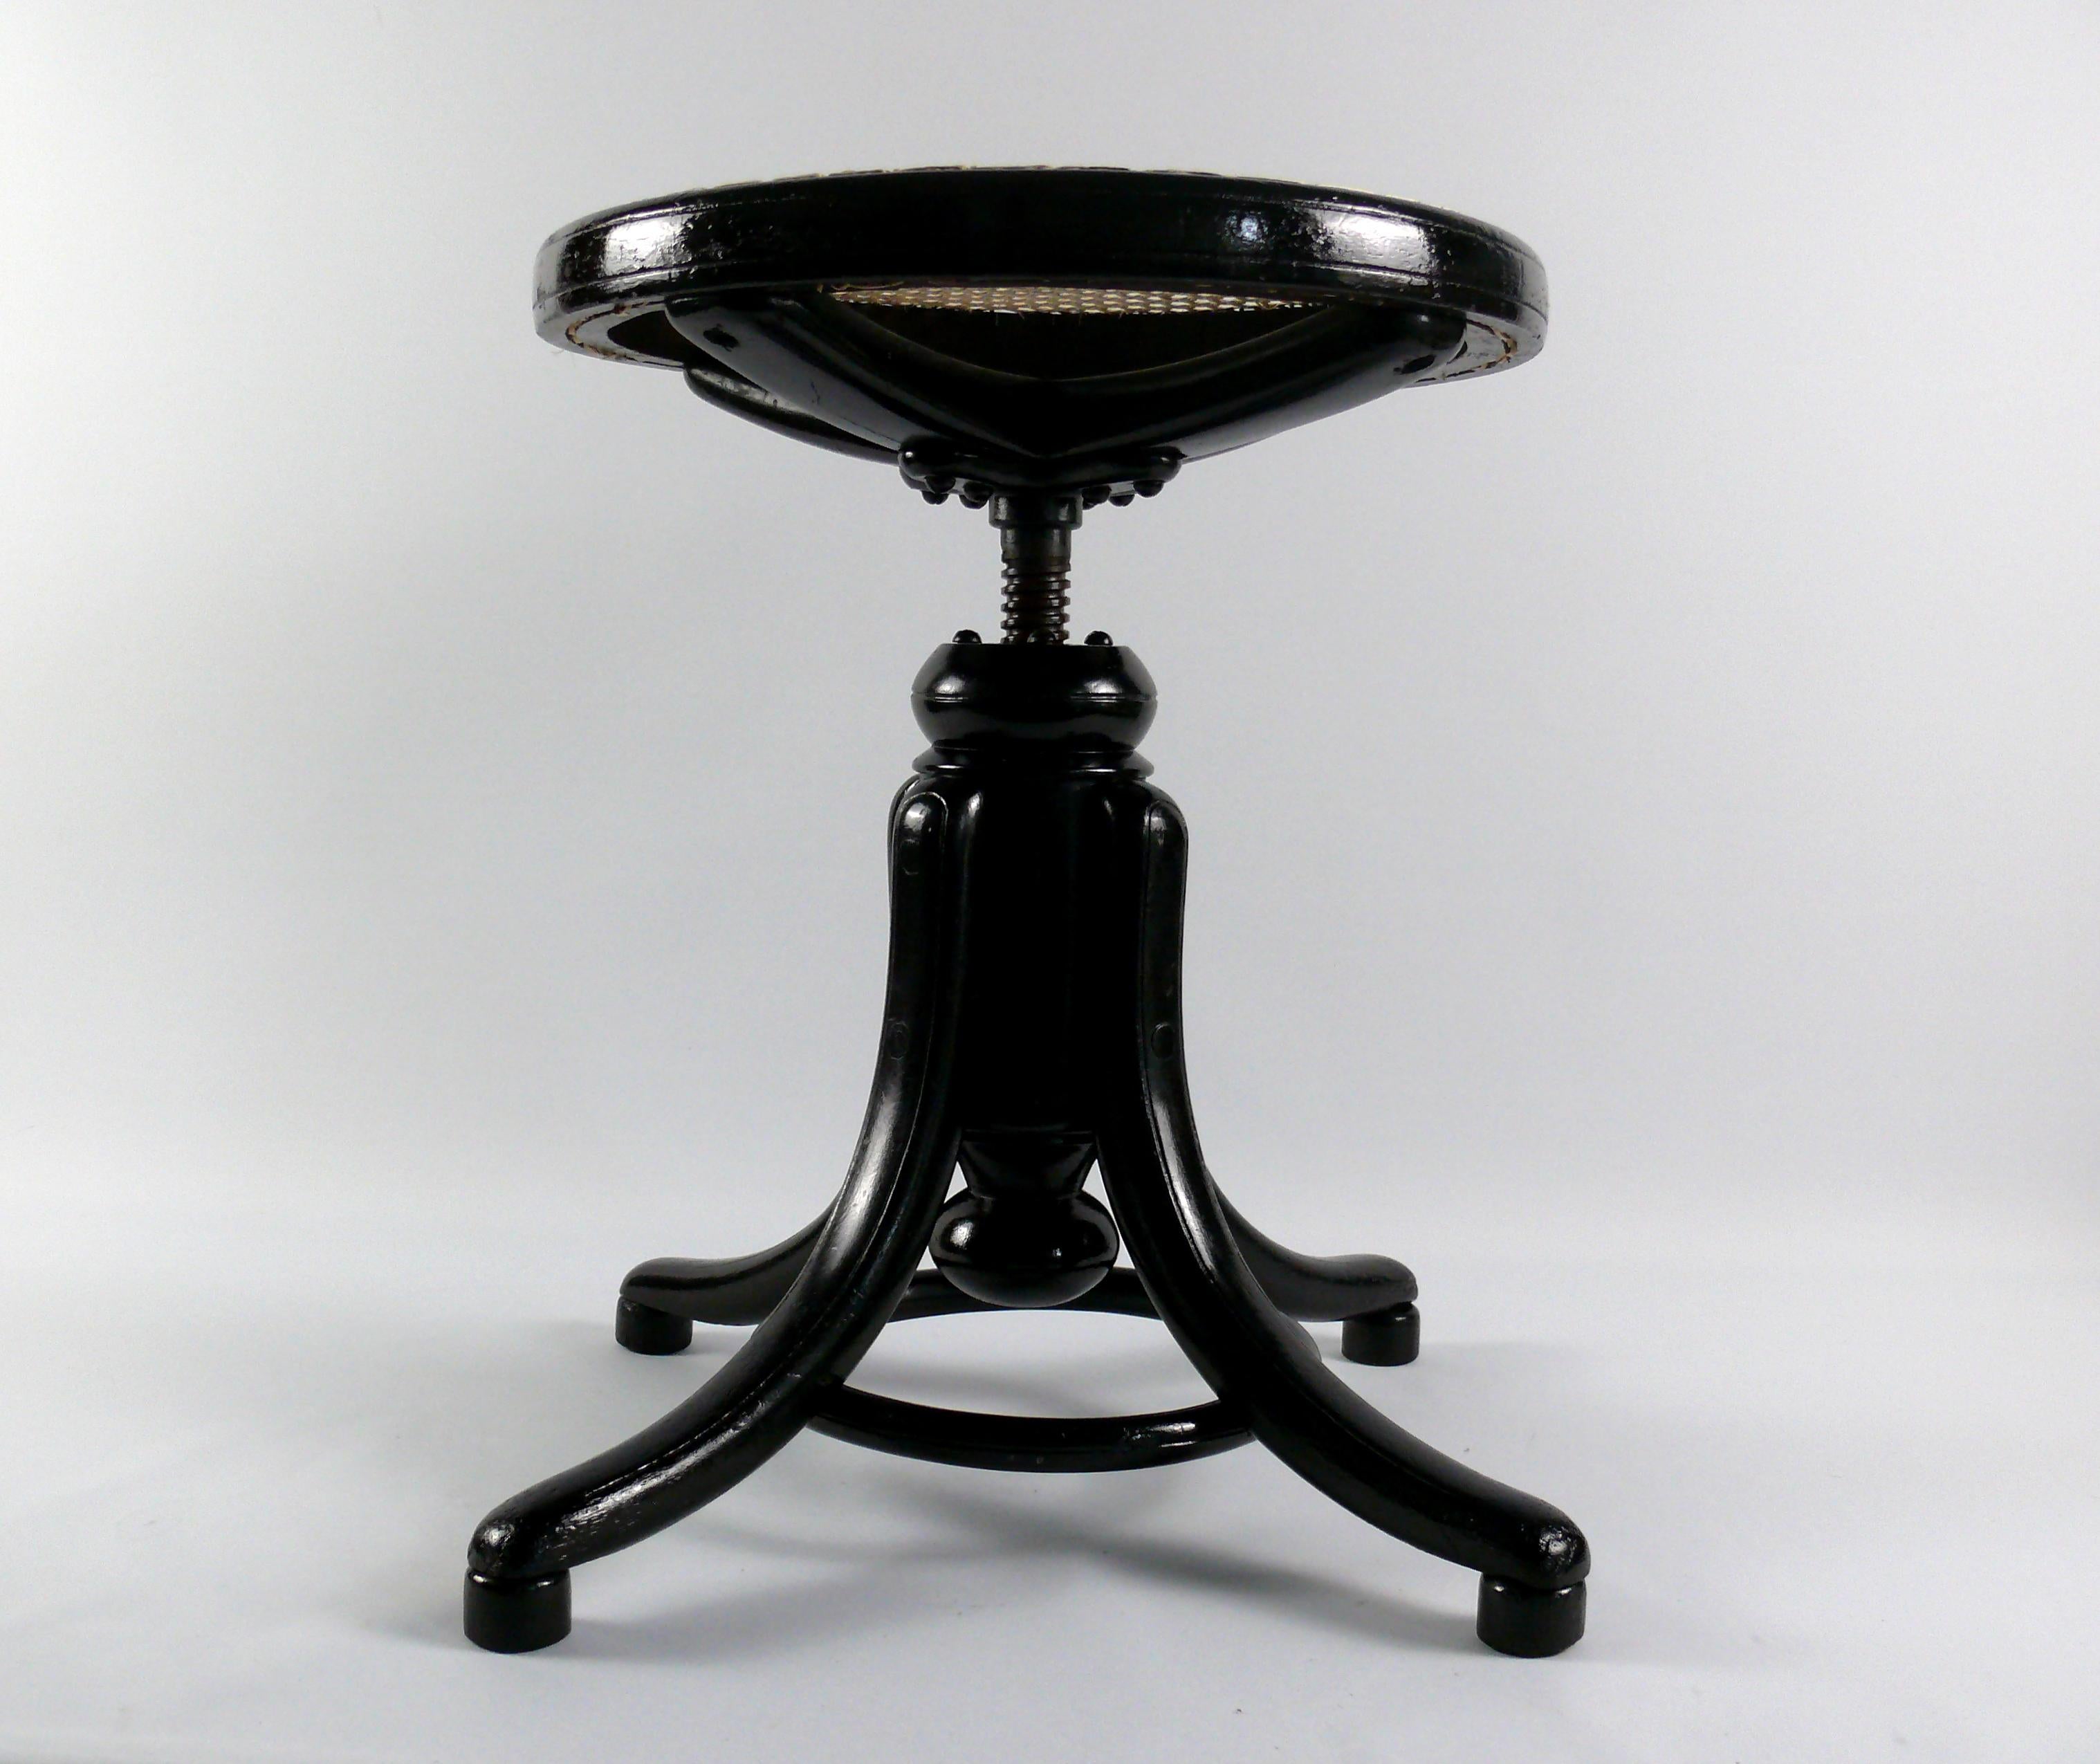 Swivel stool No.1 from the traditional company Gebrüder Thonet, Vienna from the late 19th century. The piano stool is made of black lacquered wood and has a frame with a bentwood ring. The curved feet are held together by the wooden ring made of